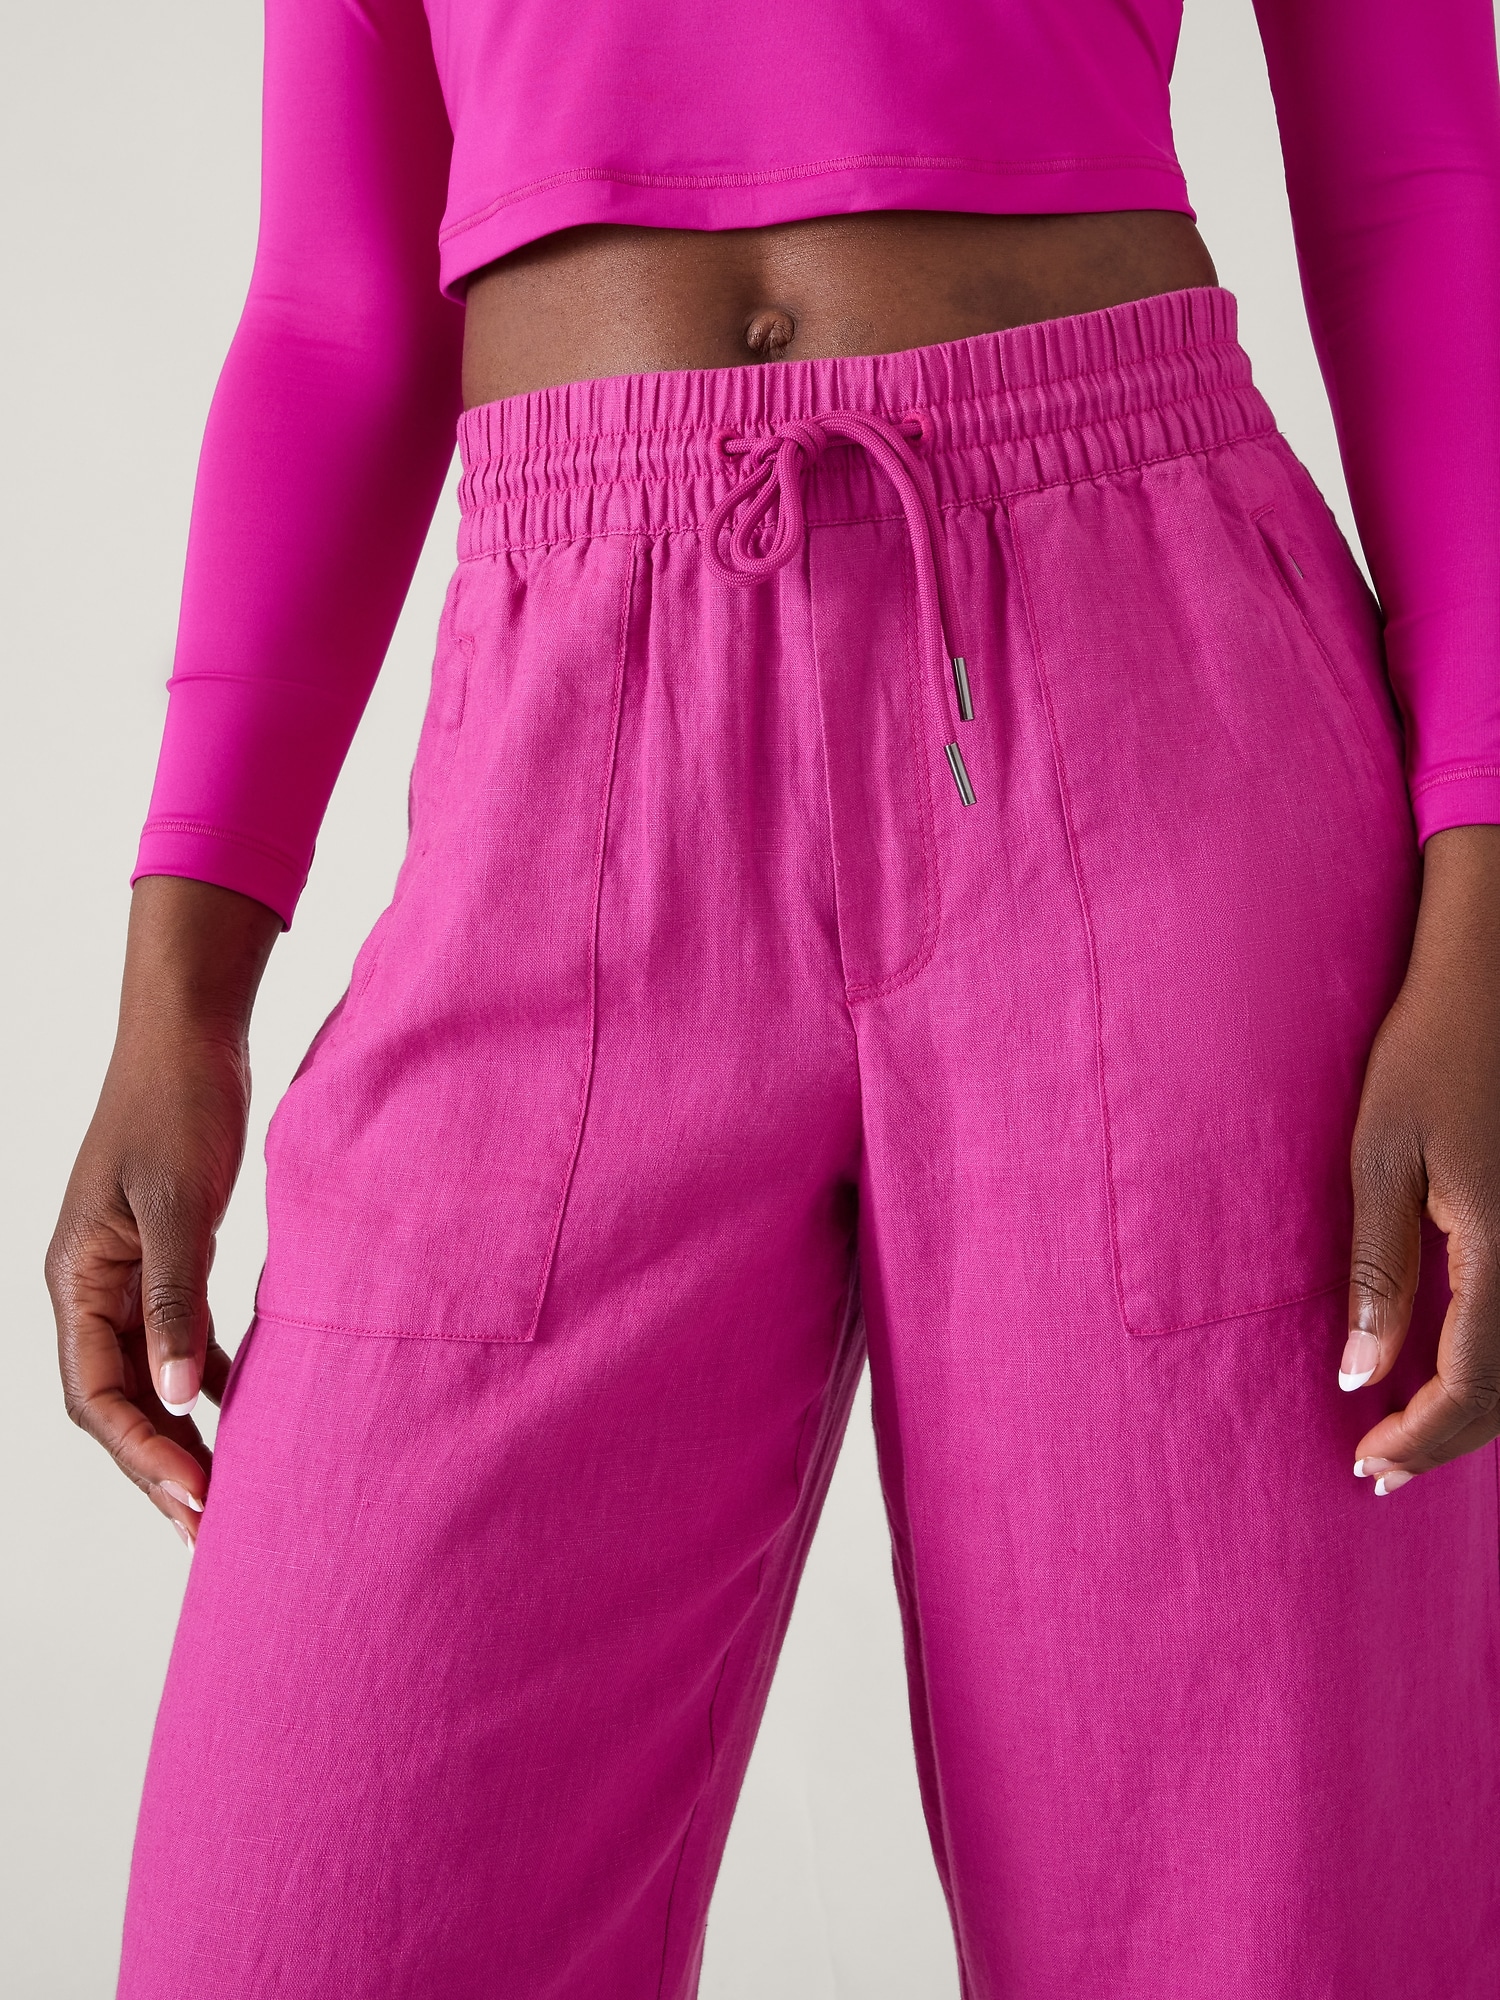 s popular cropped linen pants are a summertime staple